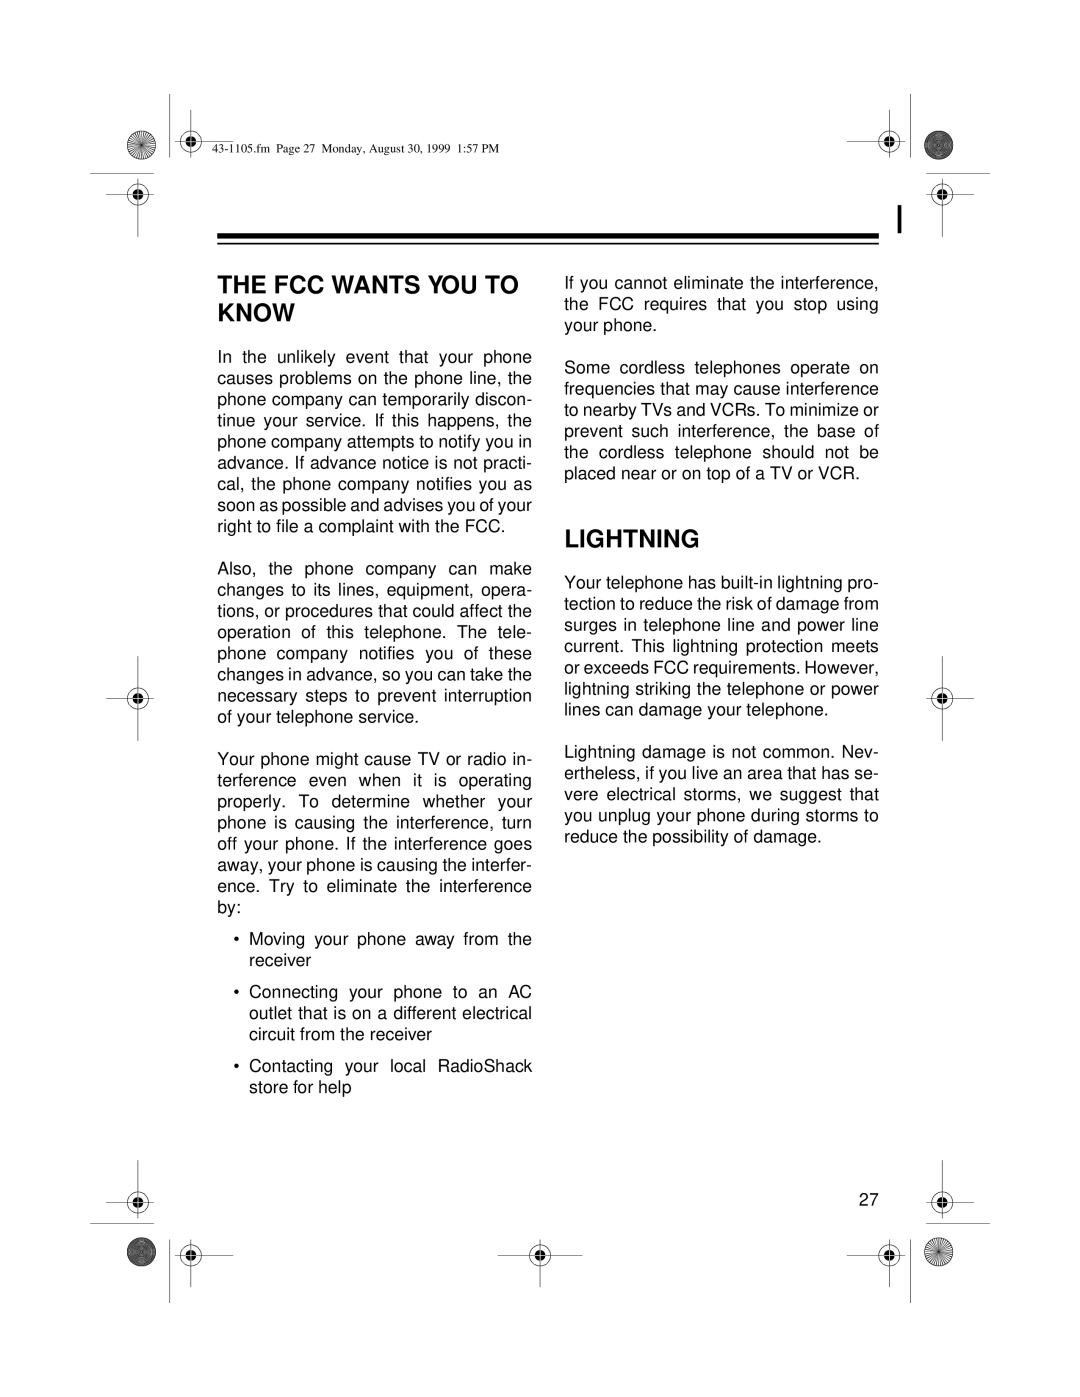 Radio Shack ET-1105 owner manual FCC Wants YOU to Know, Lightning 